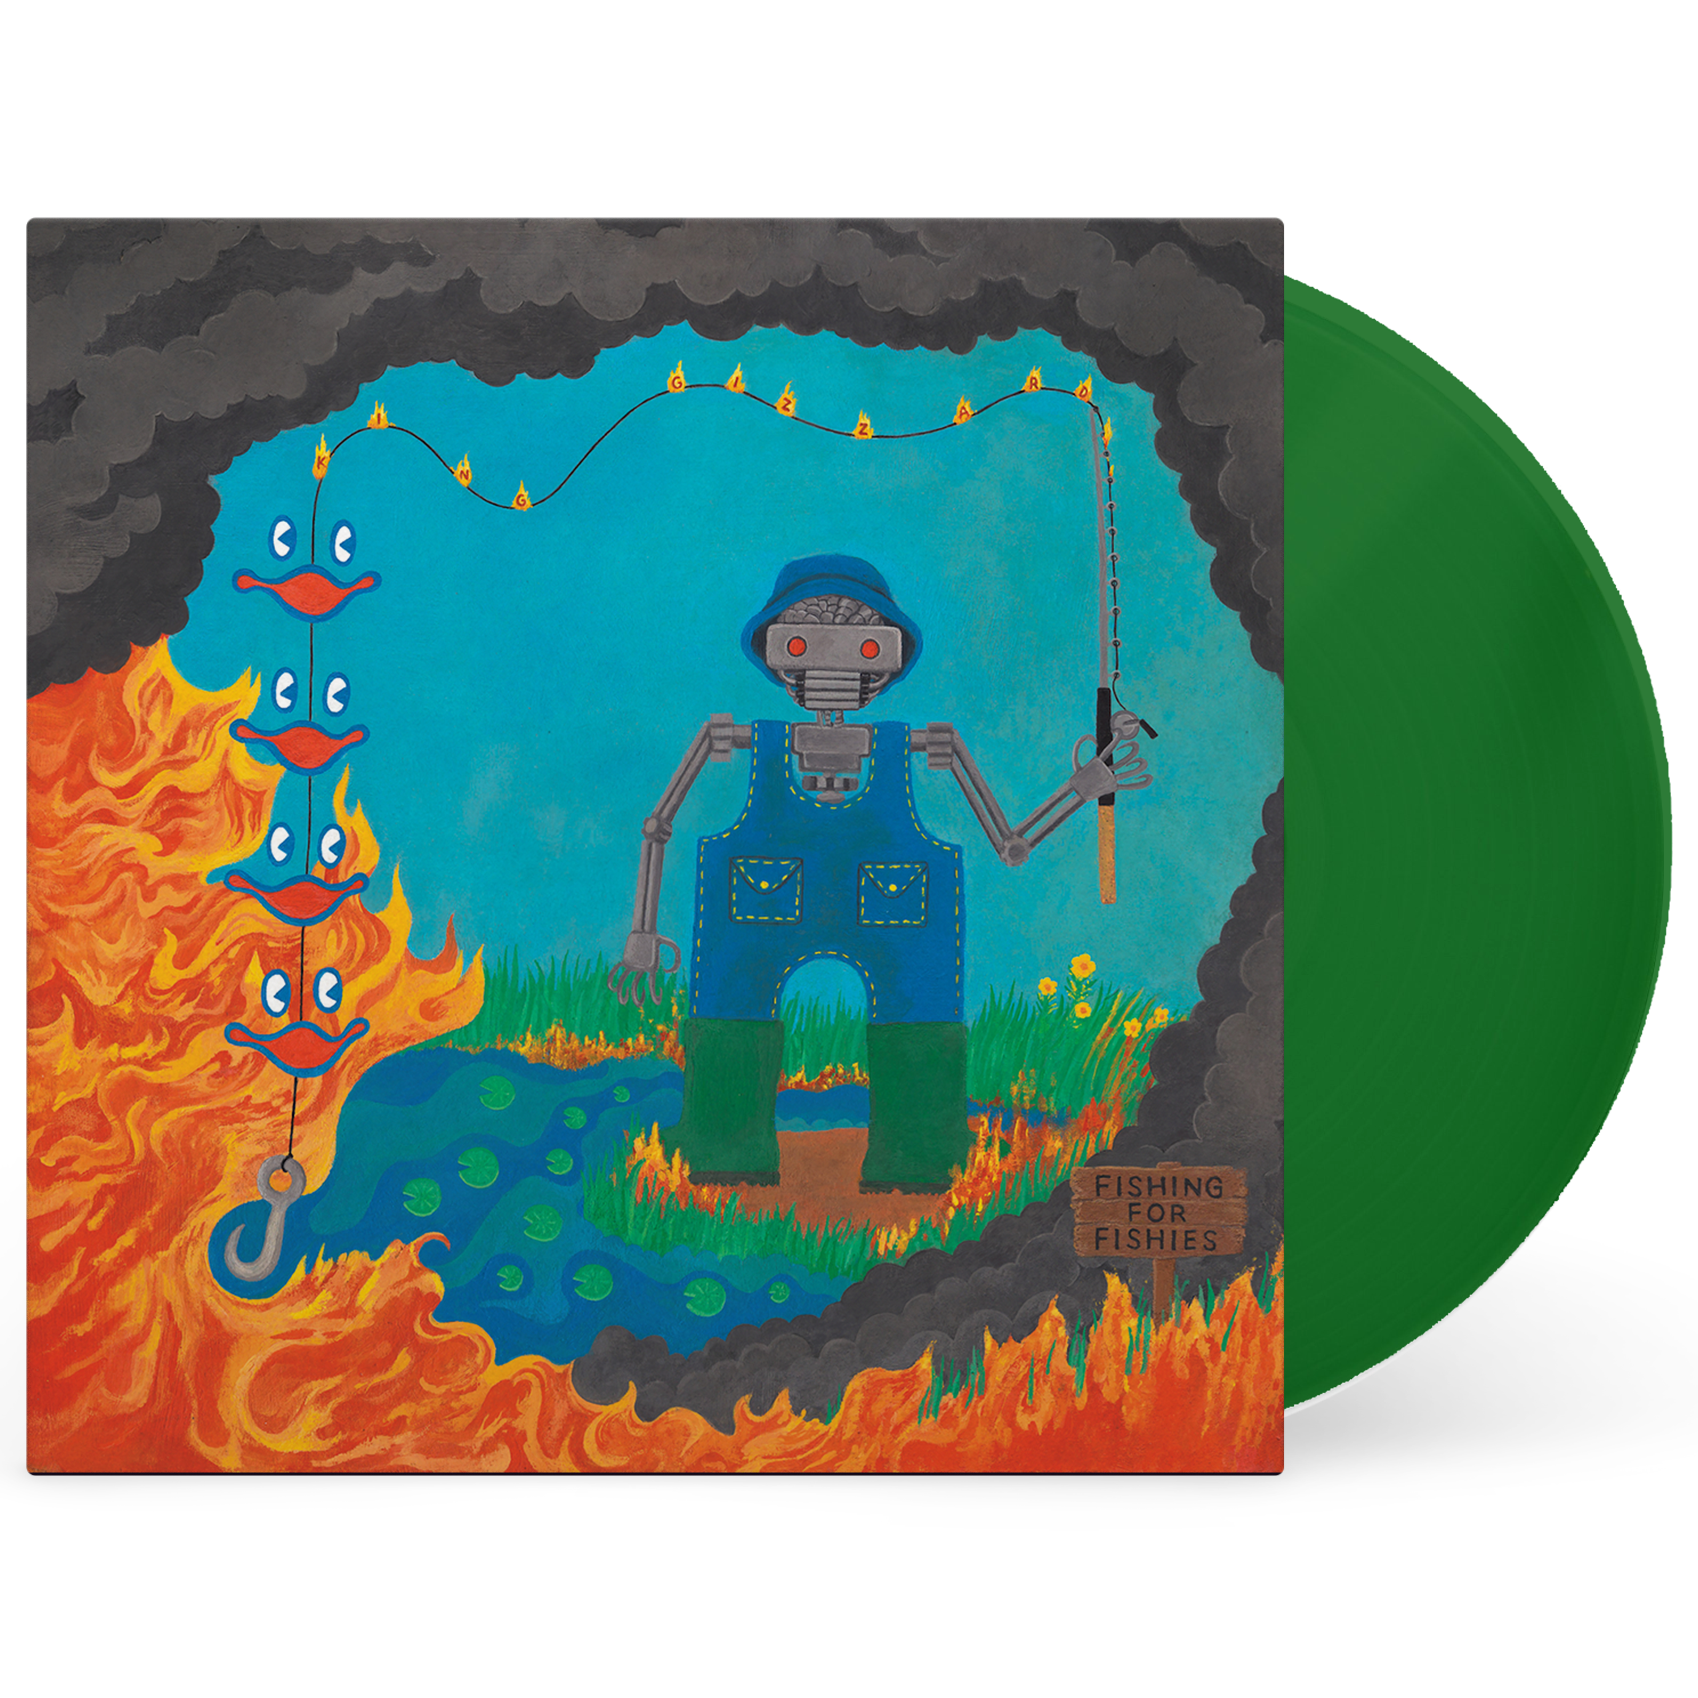 Album artwork for Fishing for Fishies by King Gizzard and The Lizard Wizard